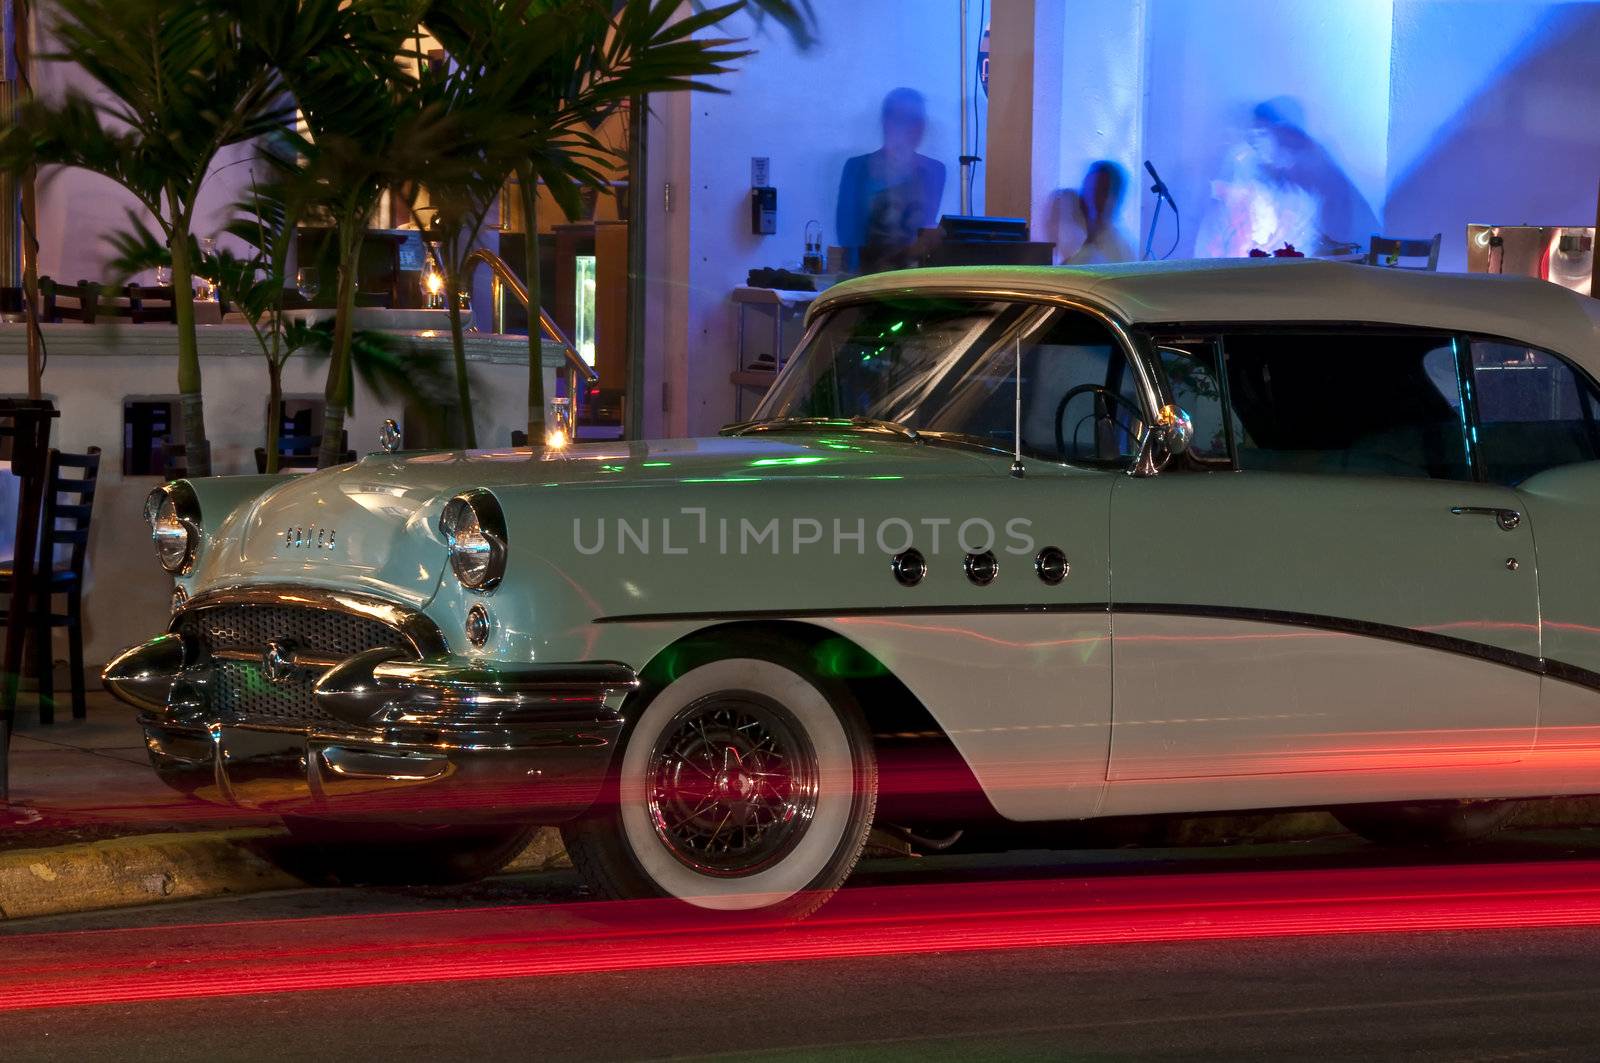 Antique Car Parked on Ocean Drive, Miami Beach Art Deco District at Night.